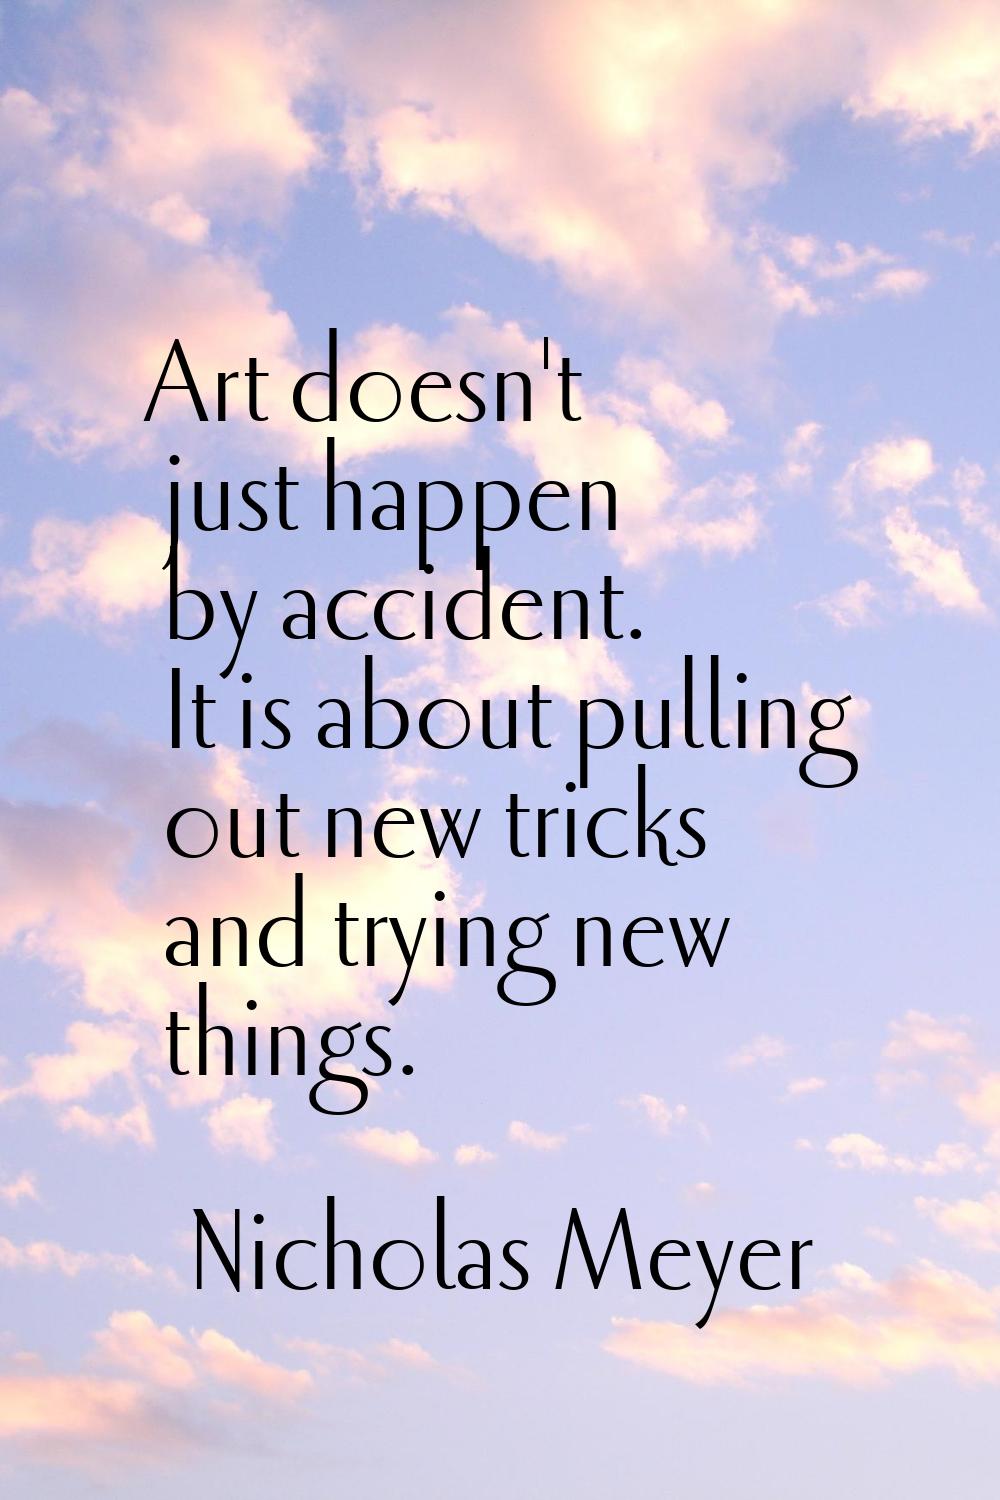 Art doesn't just happen by accident. It is about pulling out new tricks and trying new things.